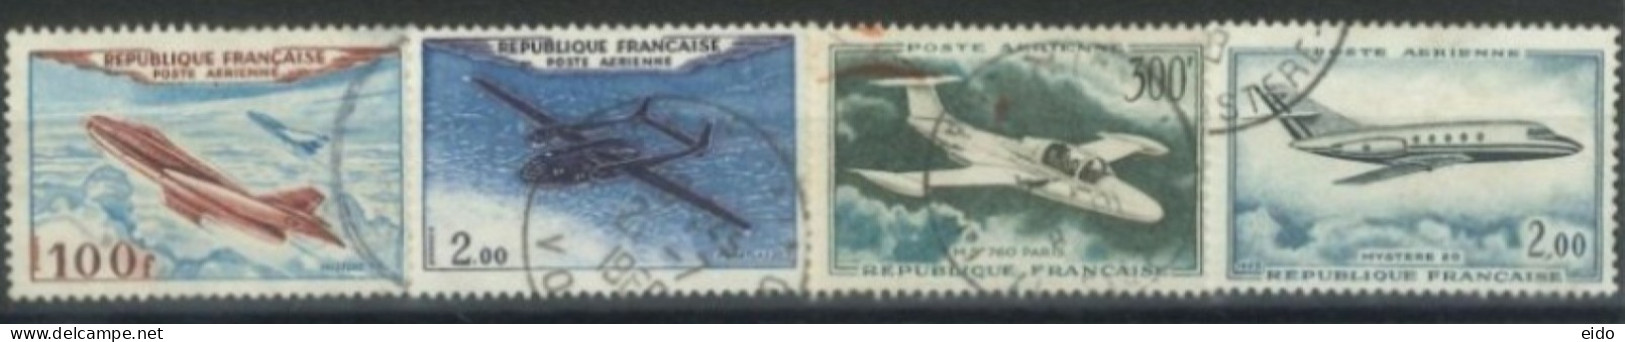 FRANCE - 1954/65 - AIR PLANES STAMPS SET OF 4, USED - Gebraucht